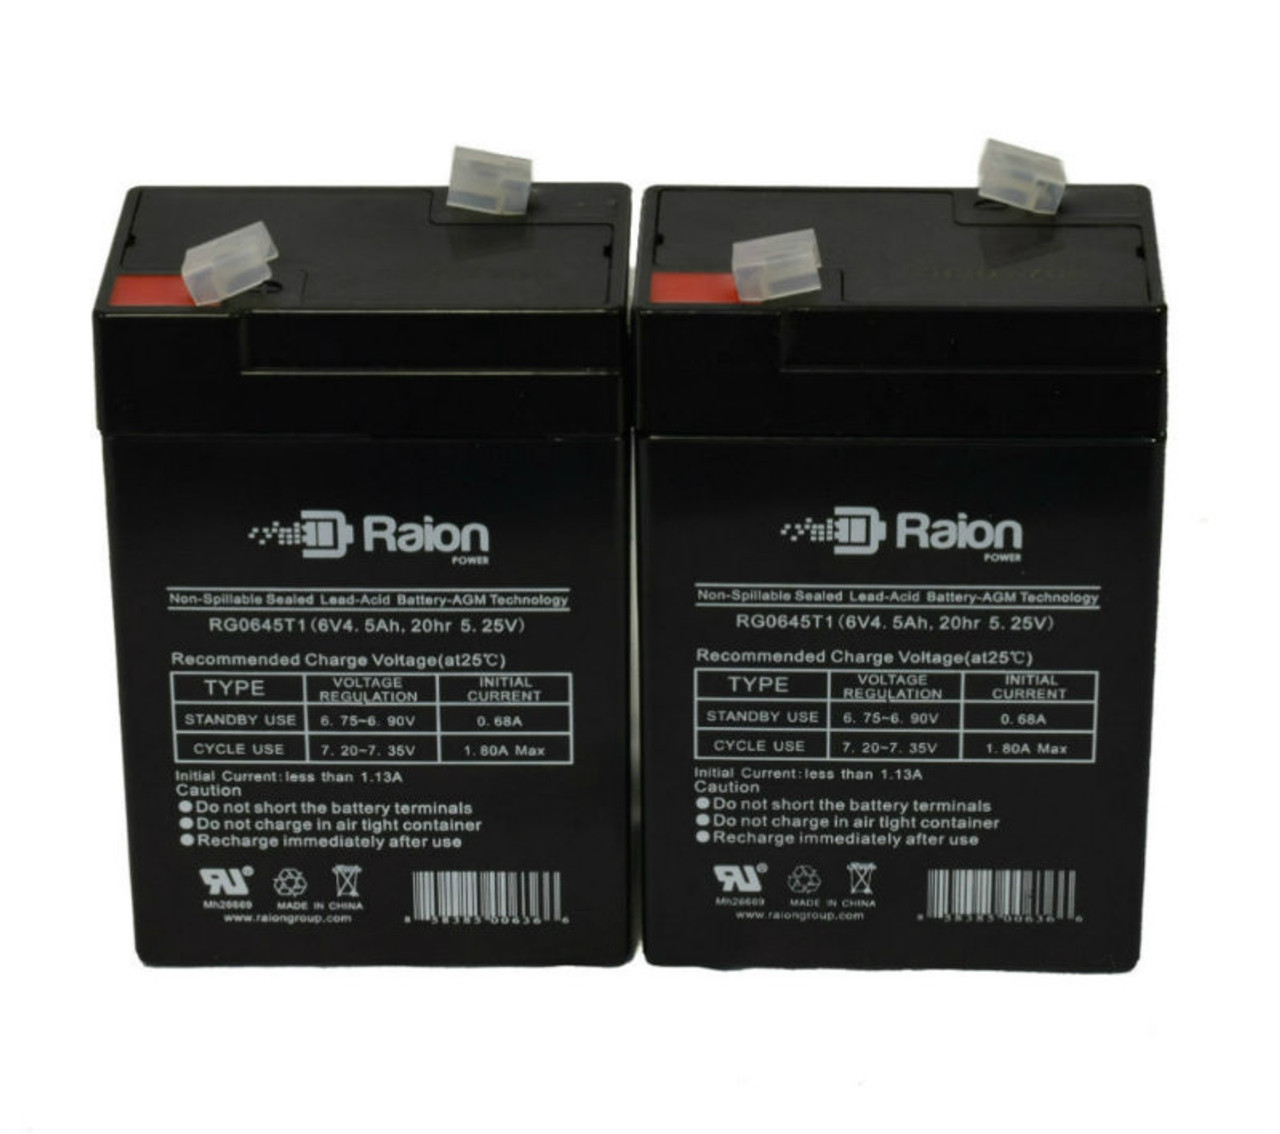 Raion Power 6 Volt 4.5Ah RG0645T1 Replacement Battery for Mule PM645 - 2 Pack